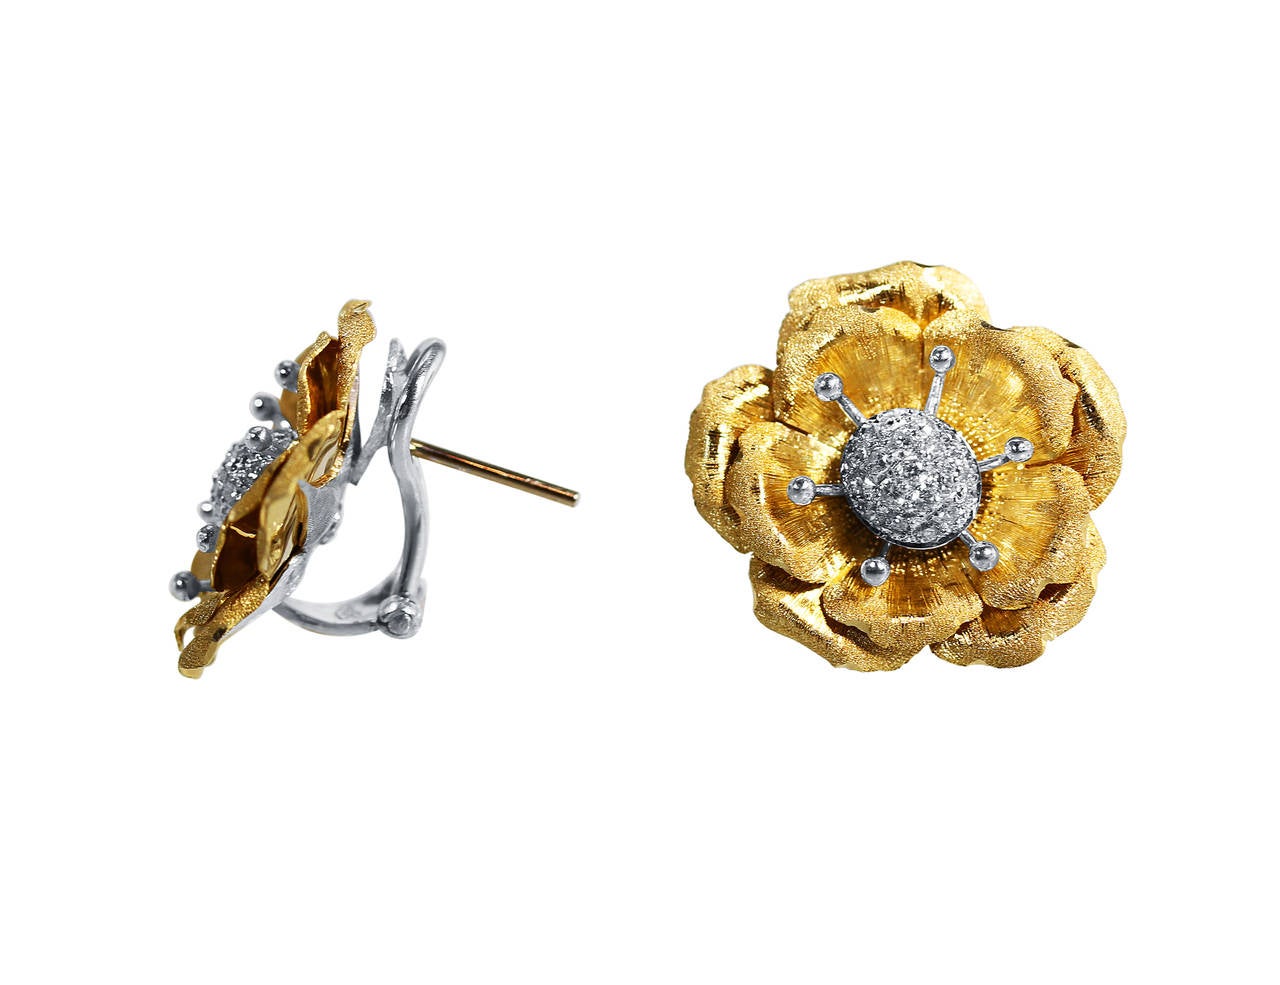 A pair of 18 karat two-tone gold and diamond flower earrings by Buccellati, Italy, the flower heads set with 38 round diamonds weighing approximately 0.40 carat, gross weight 10.6 grams, measuring 7/8 inch in diameter. Signed M Buccellati, Italy,